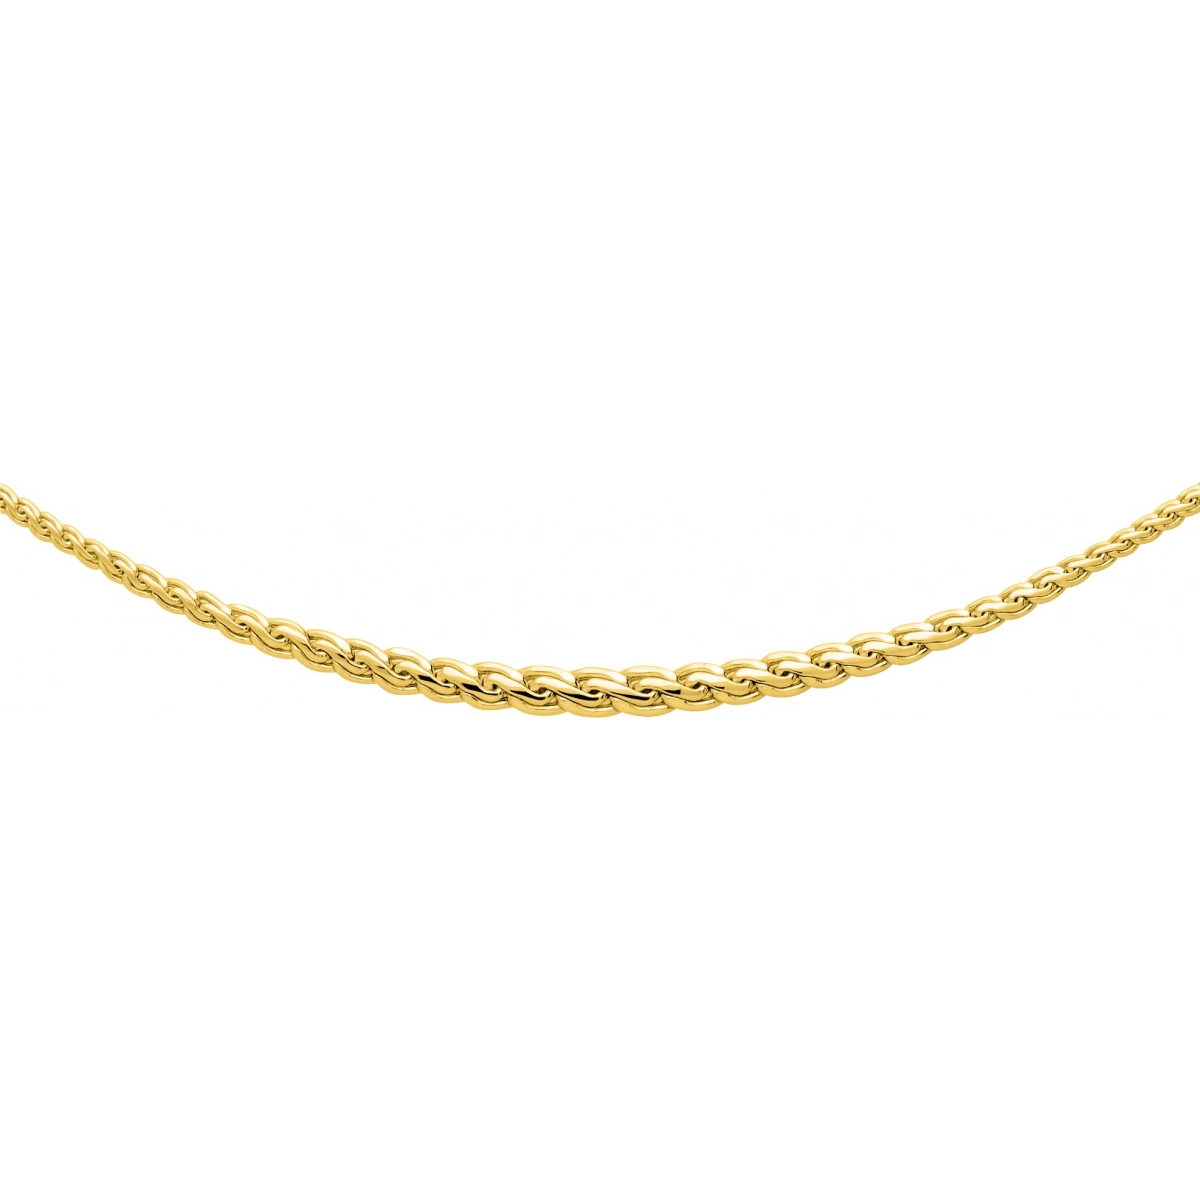 Necklace gold plated Brass - Size: 45  Lua Blanca  102112.45